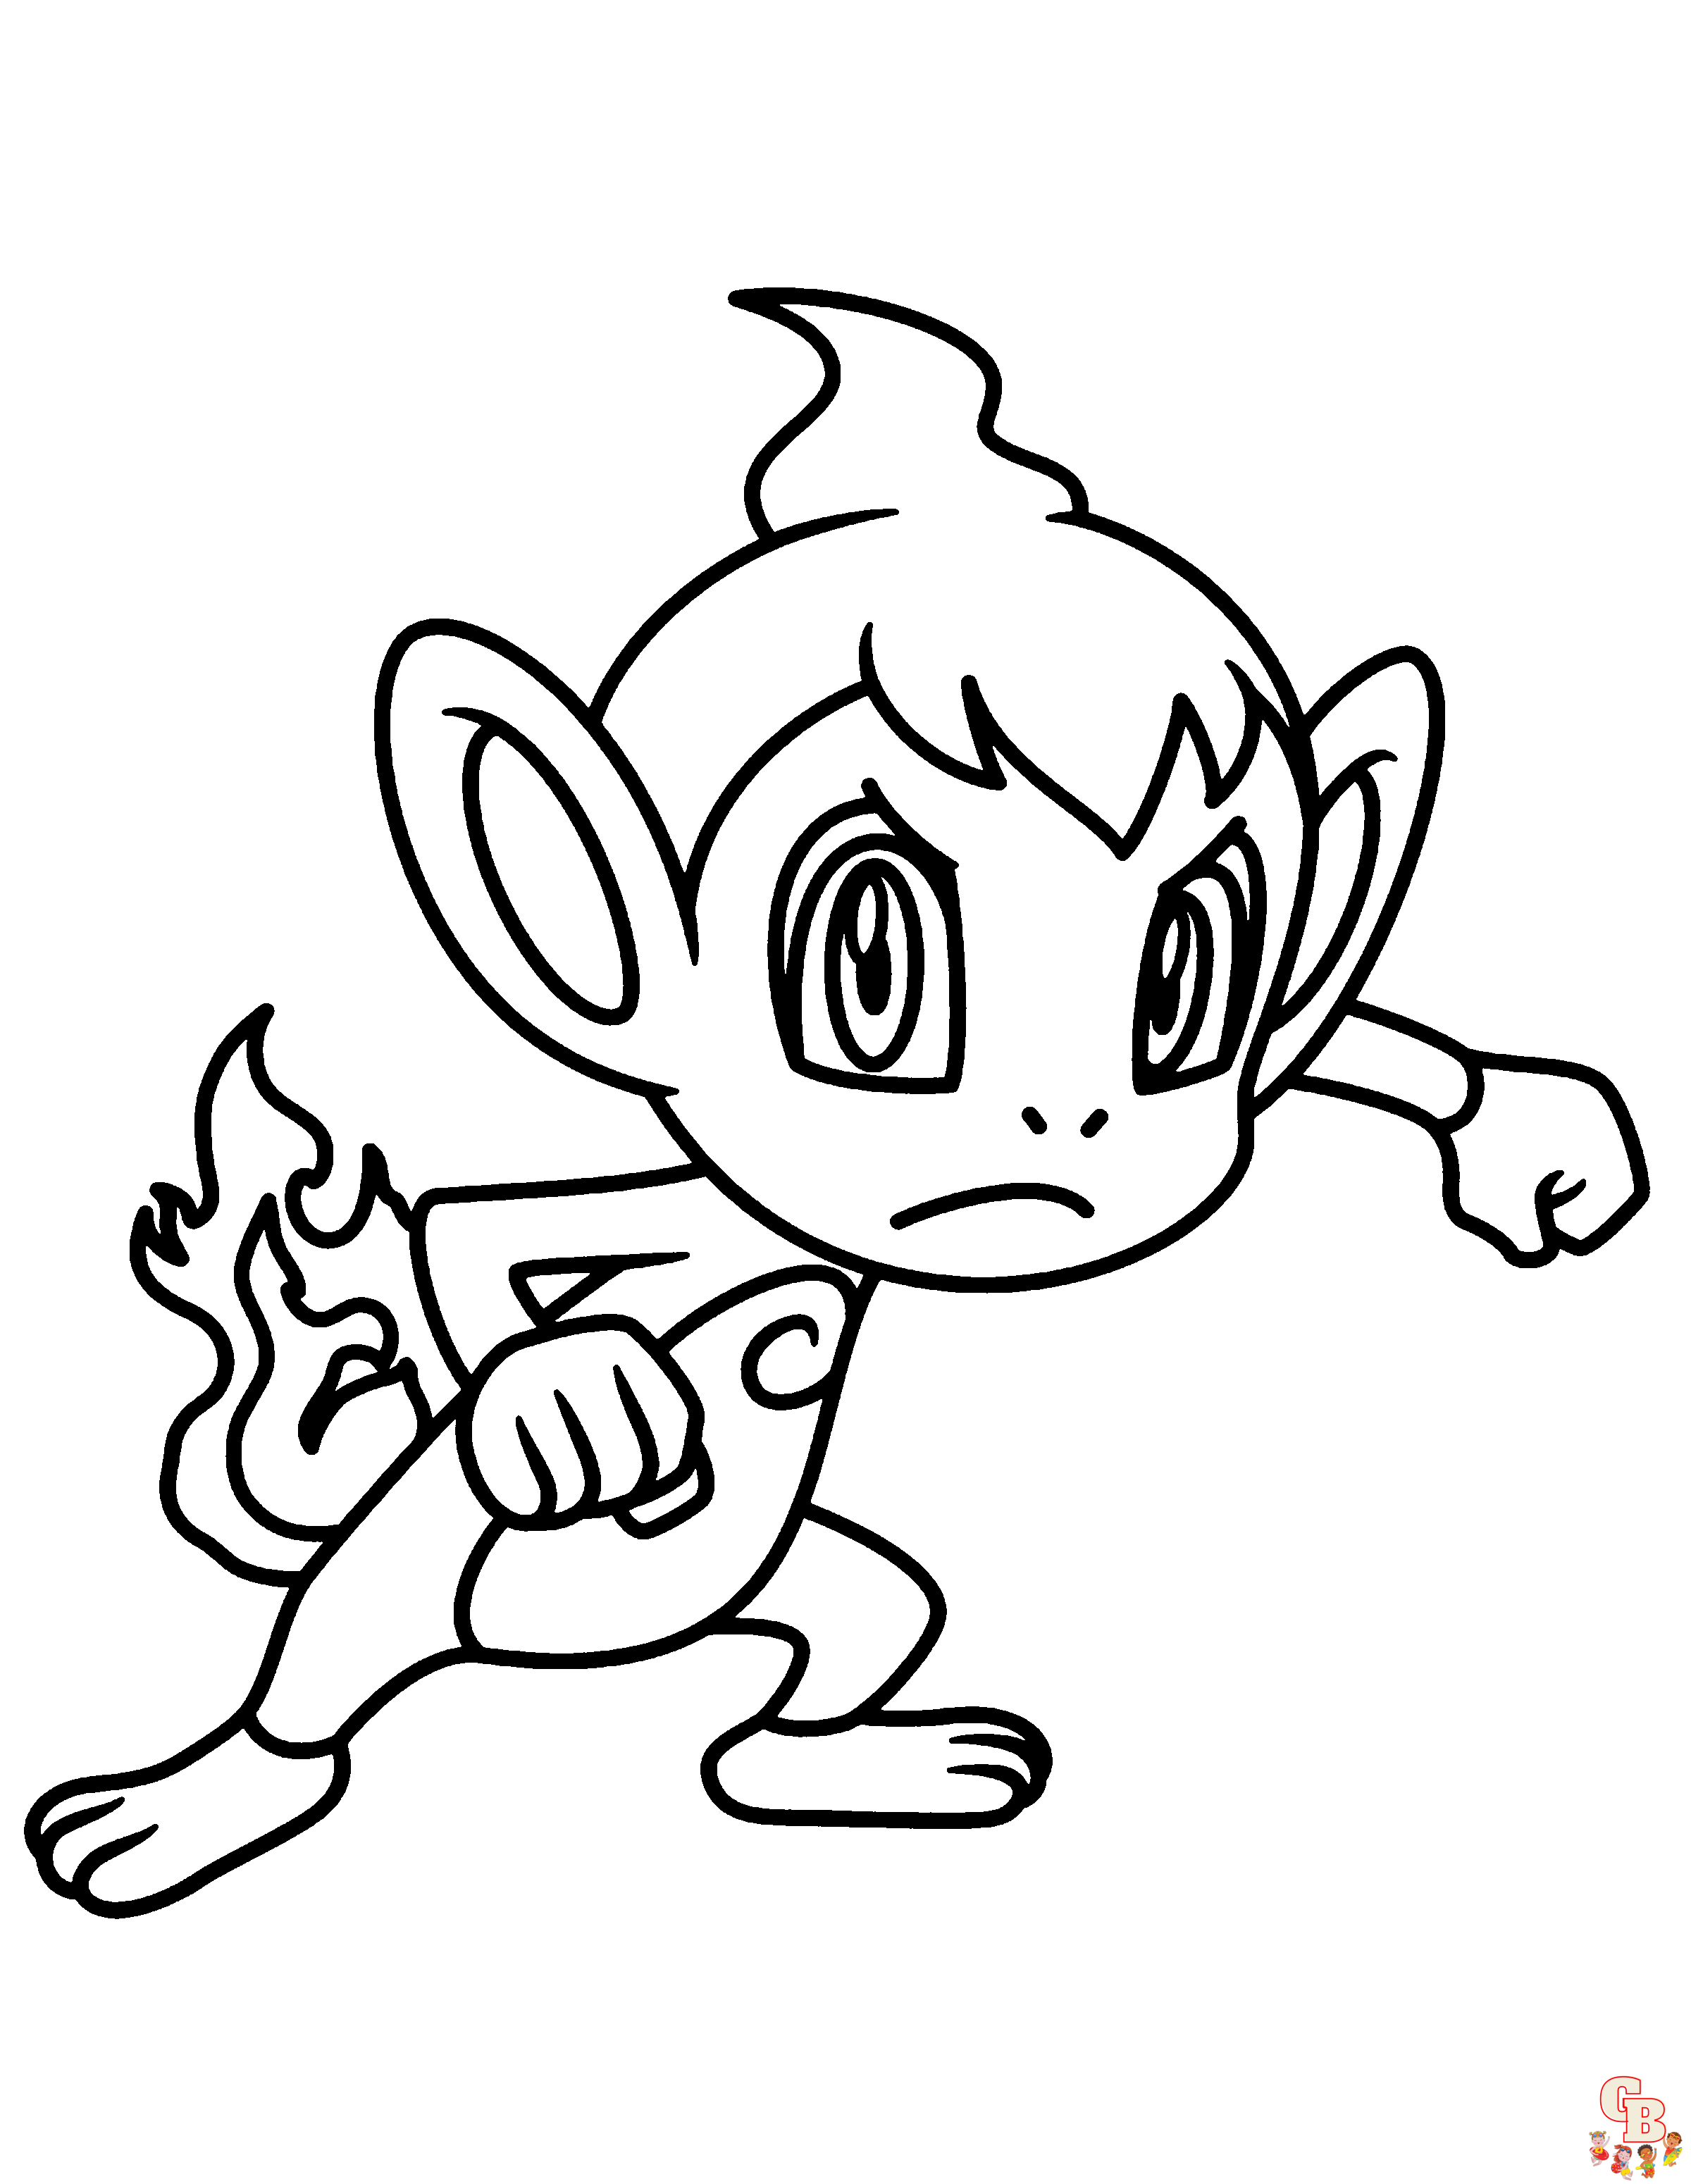 Pokemon Chimchar coloring pages printable